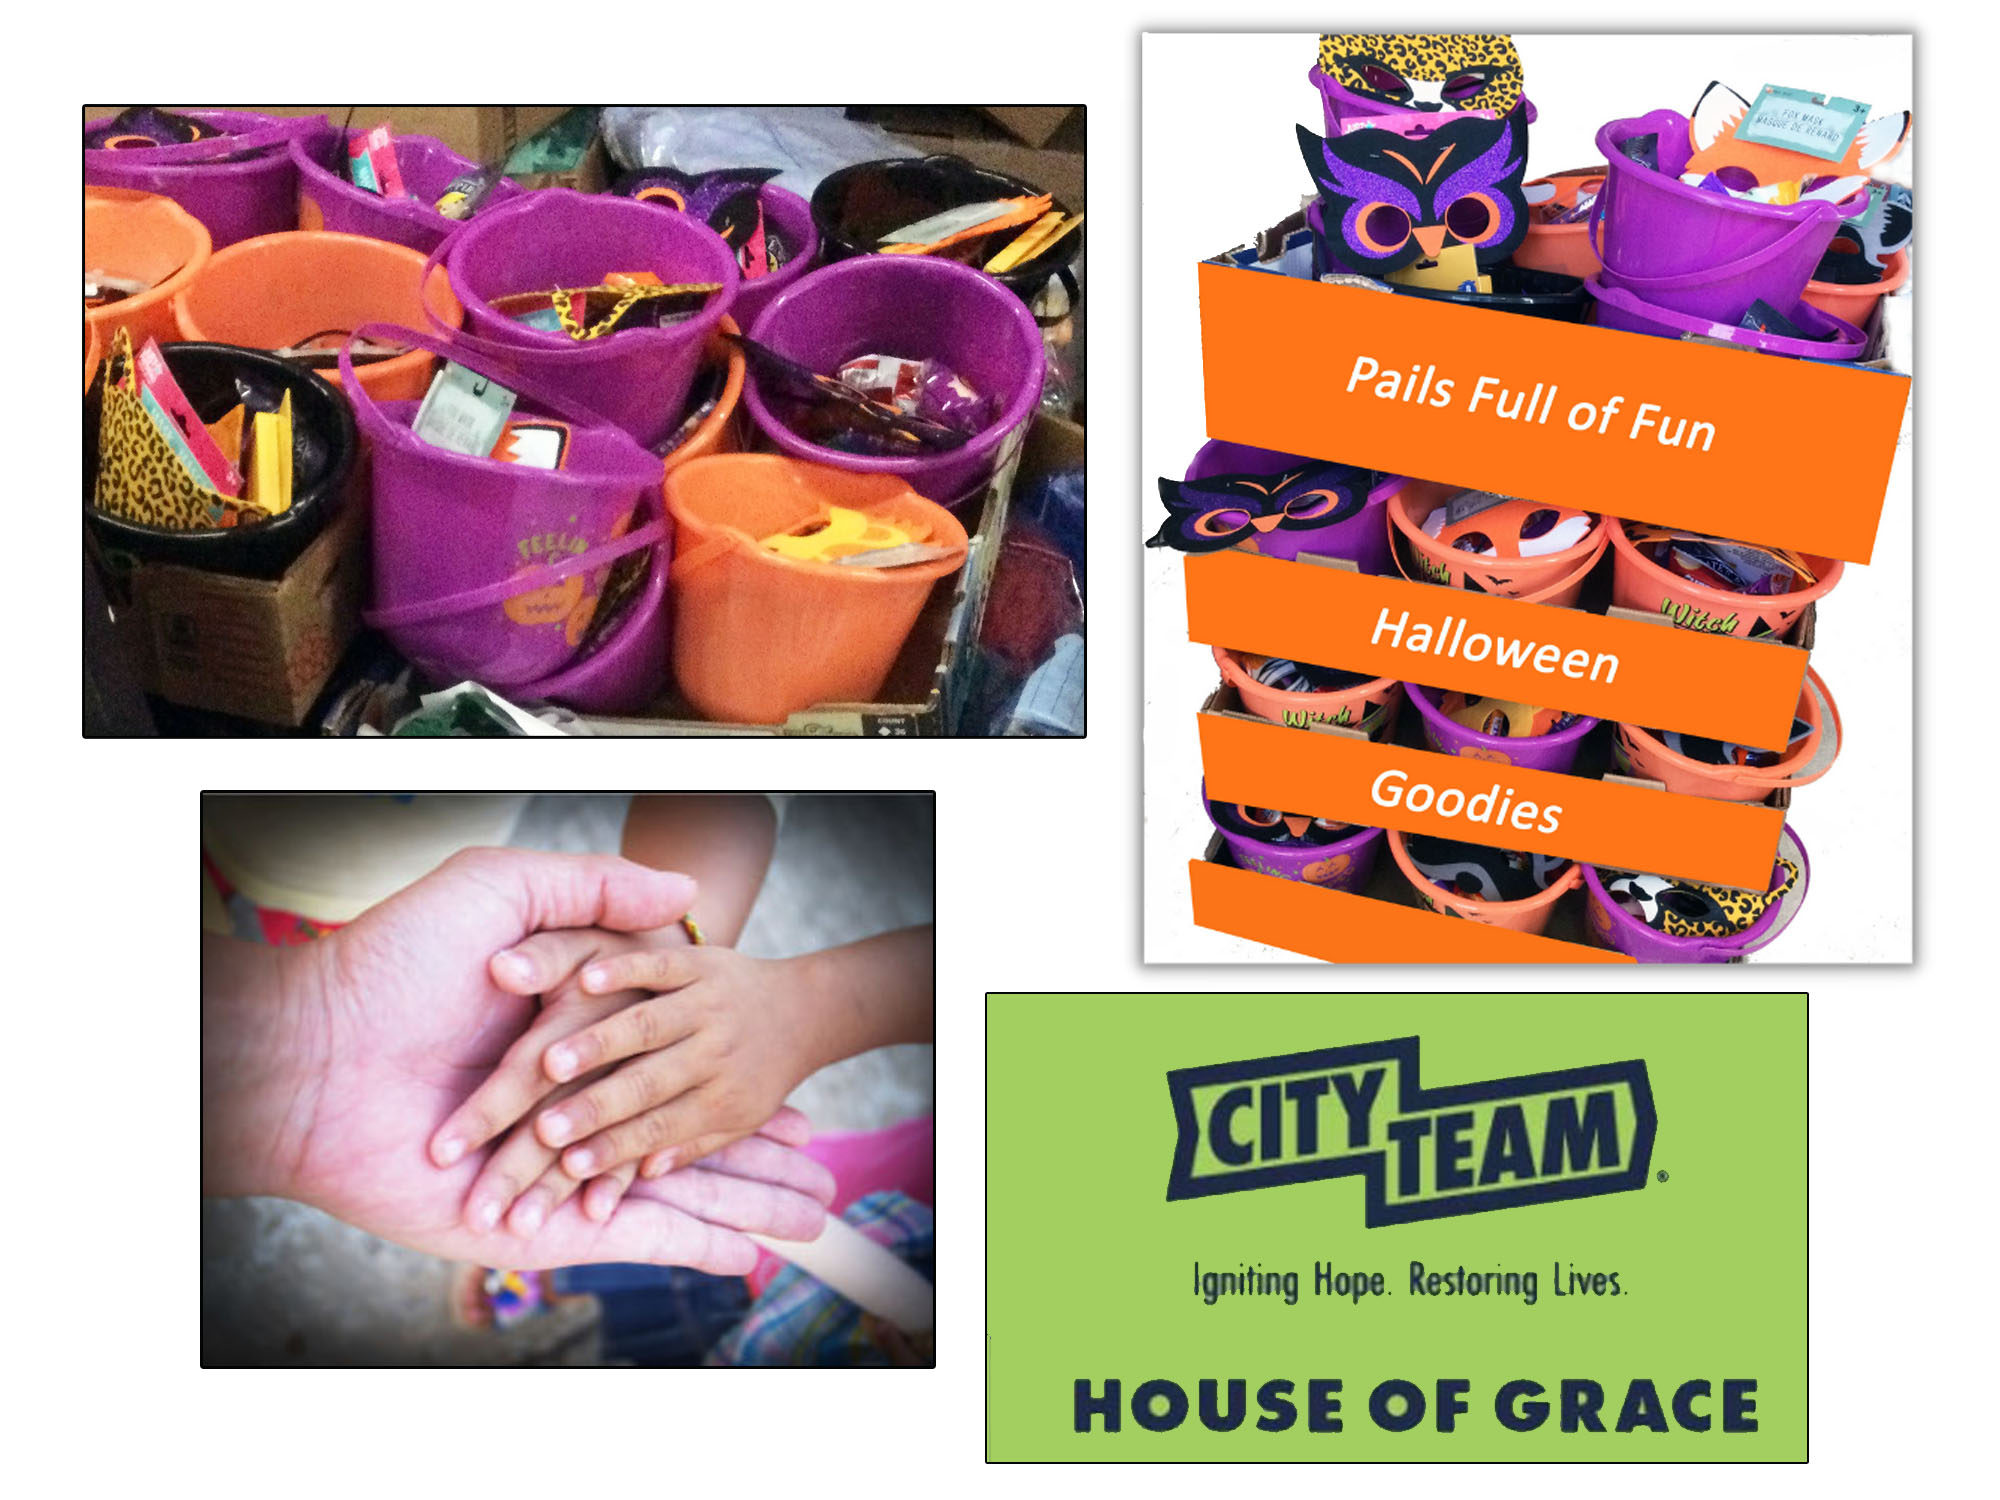 House of Grace Halloween Donation